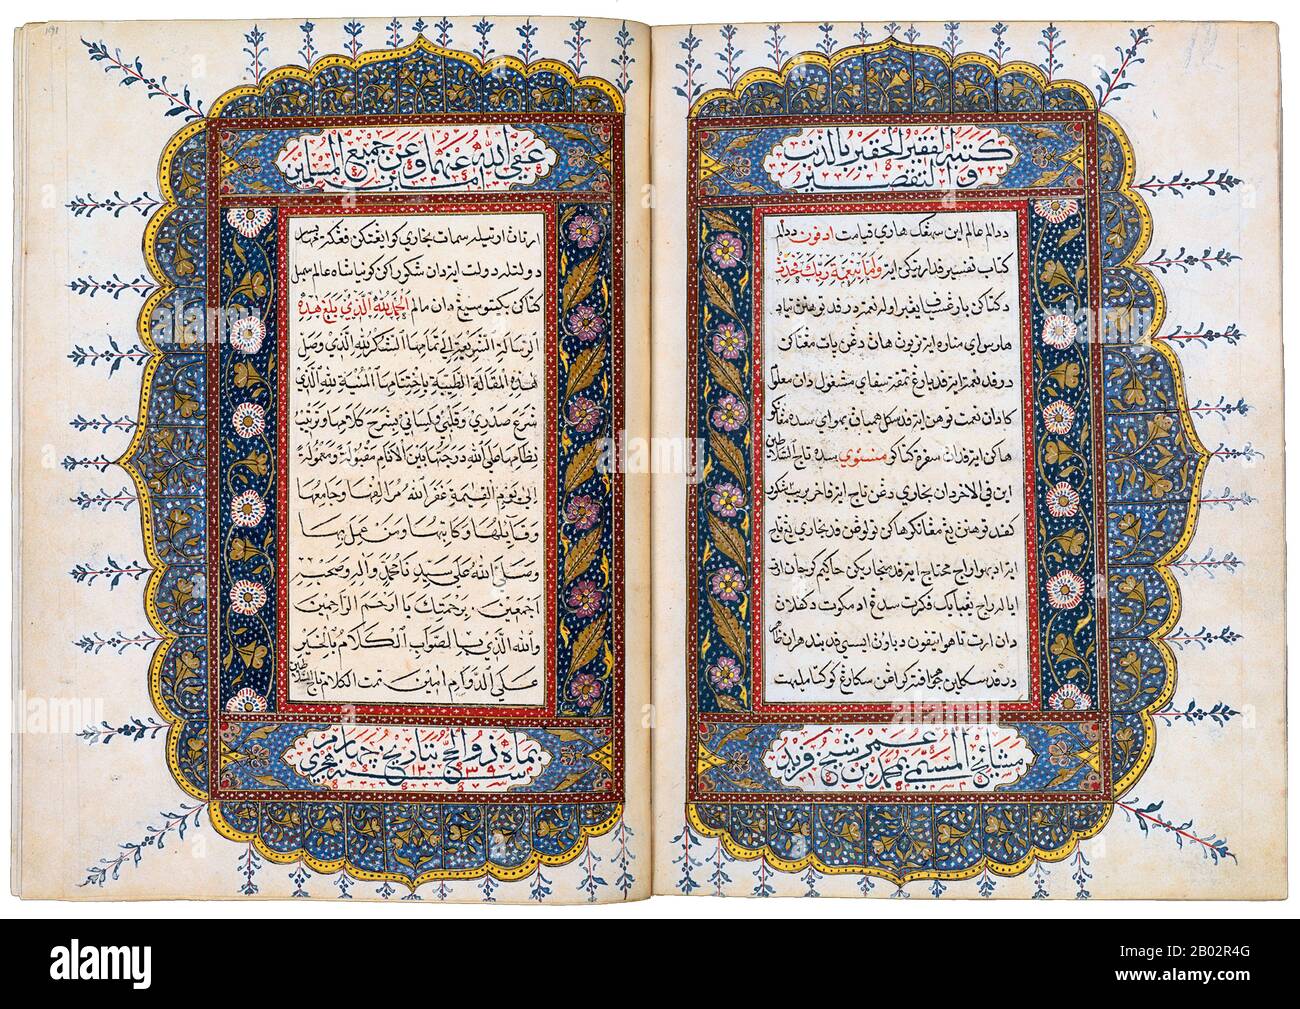 This ethical guide for rulers was composed in 1603 by Bukhari al-Johori, and contains advice on good governance. This manuscript version was made by master calligrapher Muhammad bin Umar Syaikh Farid at Penang, Malaysia, on 4 Zulhijah 1239 AH (31 July 1824 CE). Stock Photo